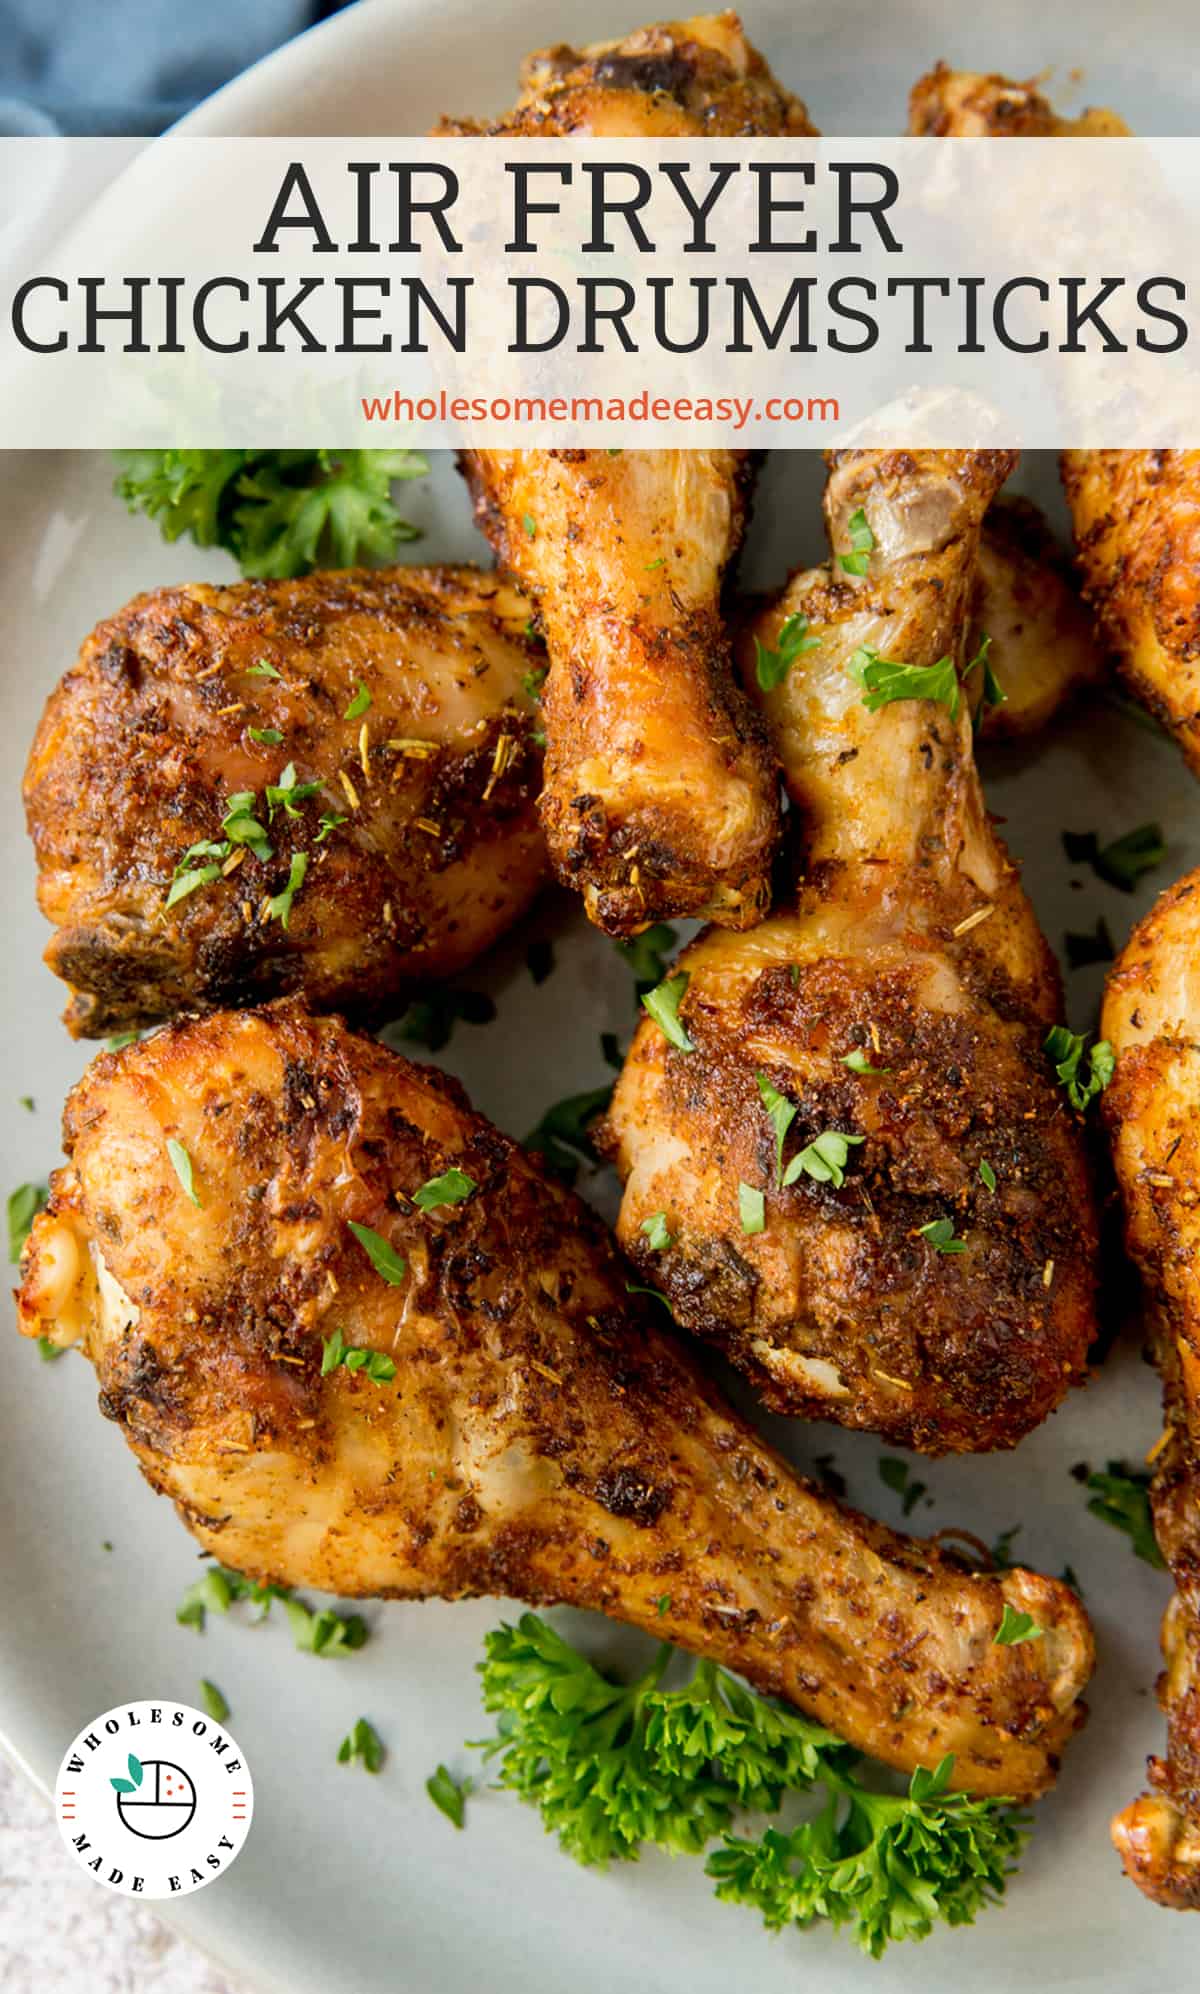 Air Fried Chicken Drumsticks on a white plate with text overlay.